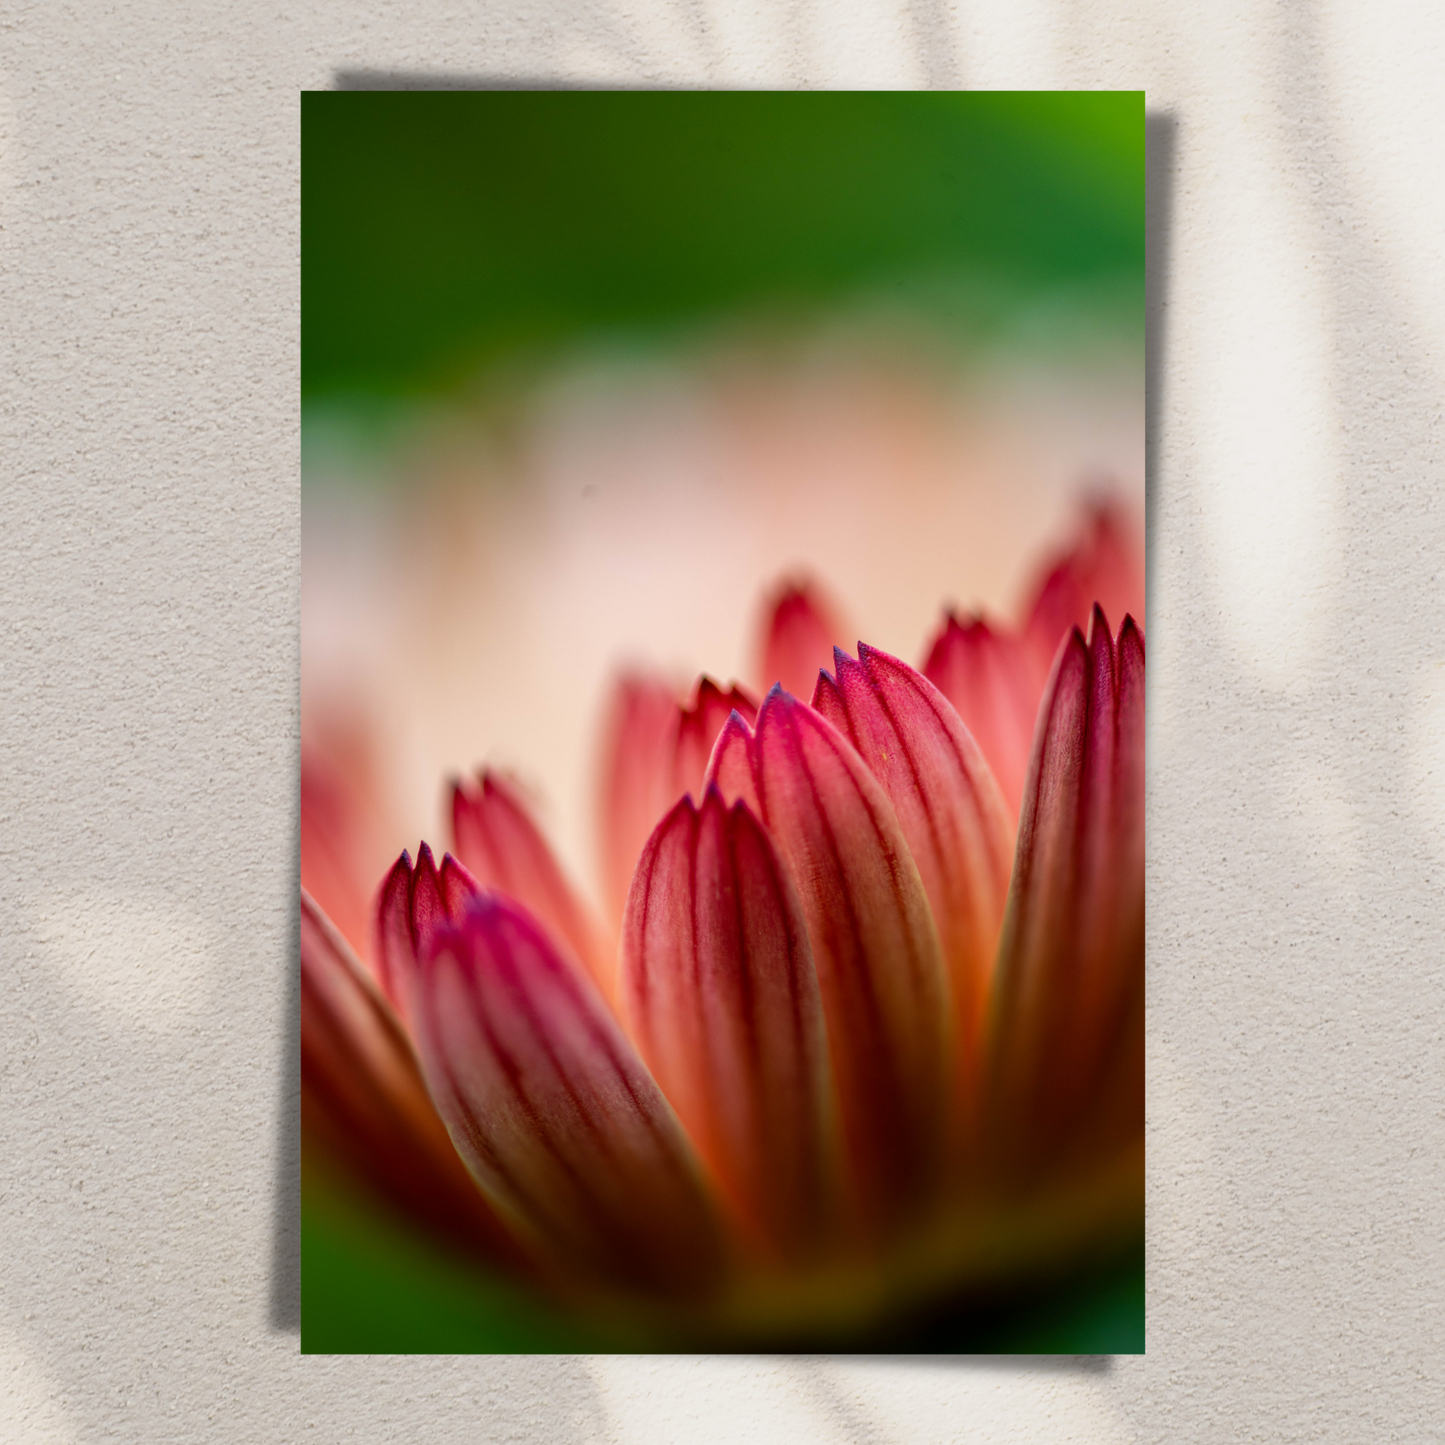 Daisy Dreams - Fine Art Photography - Art for your home or Office